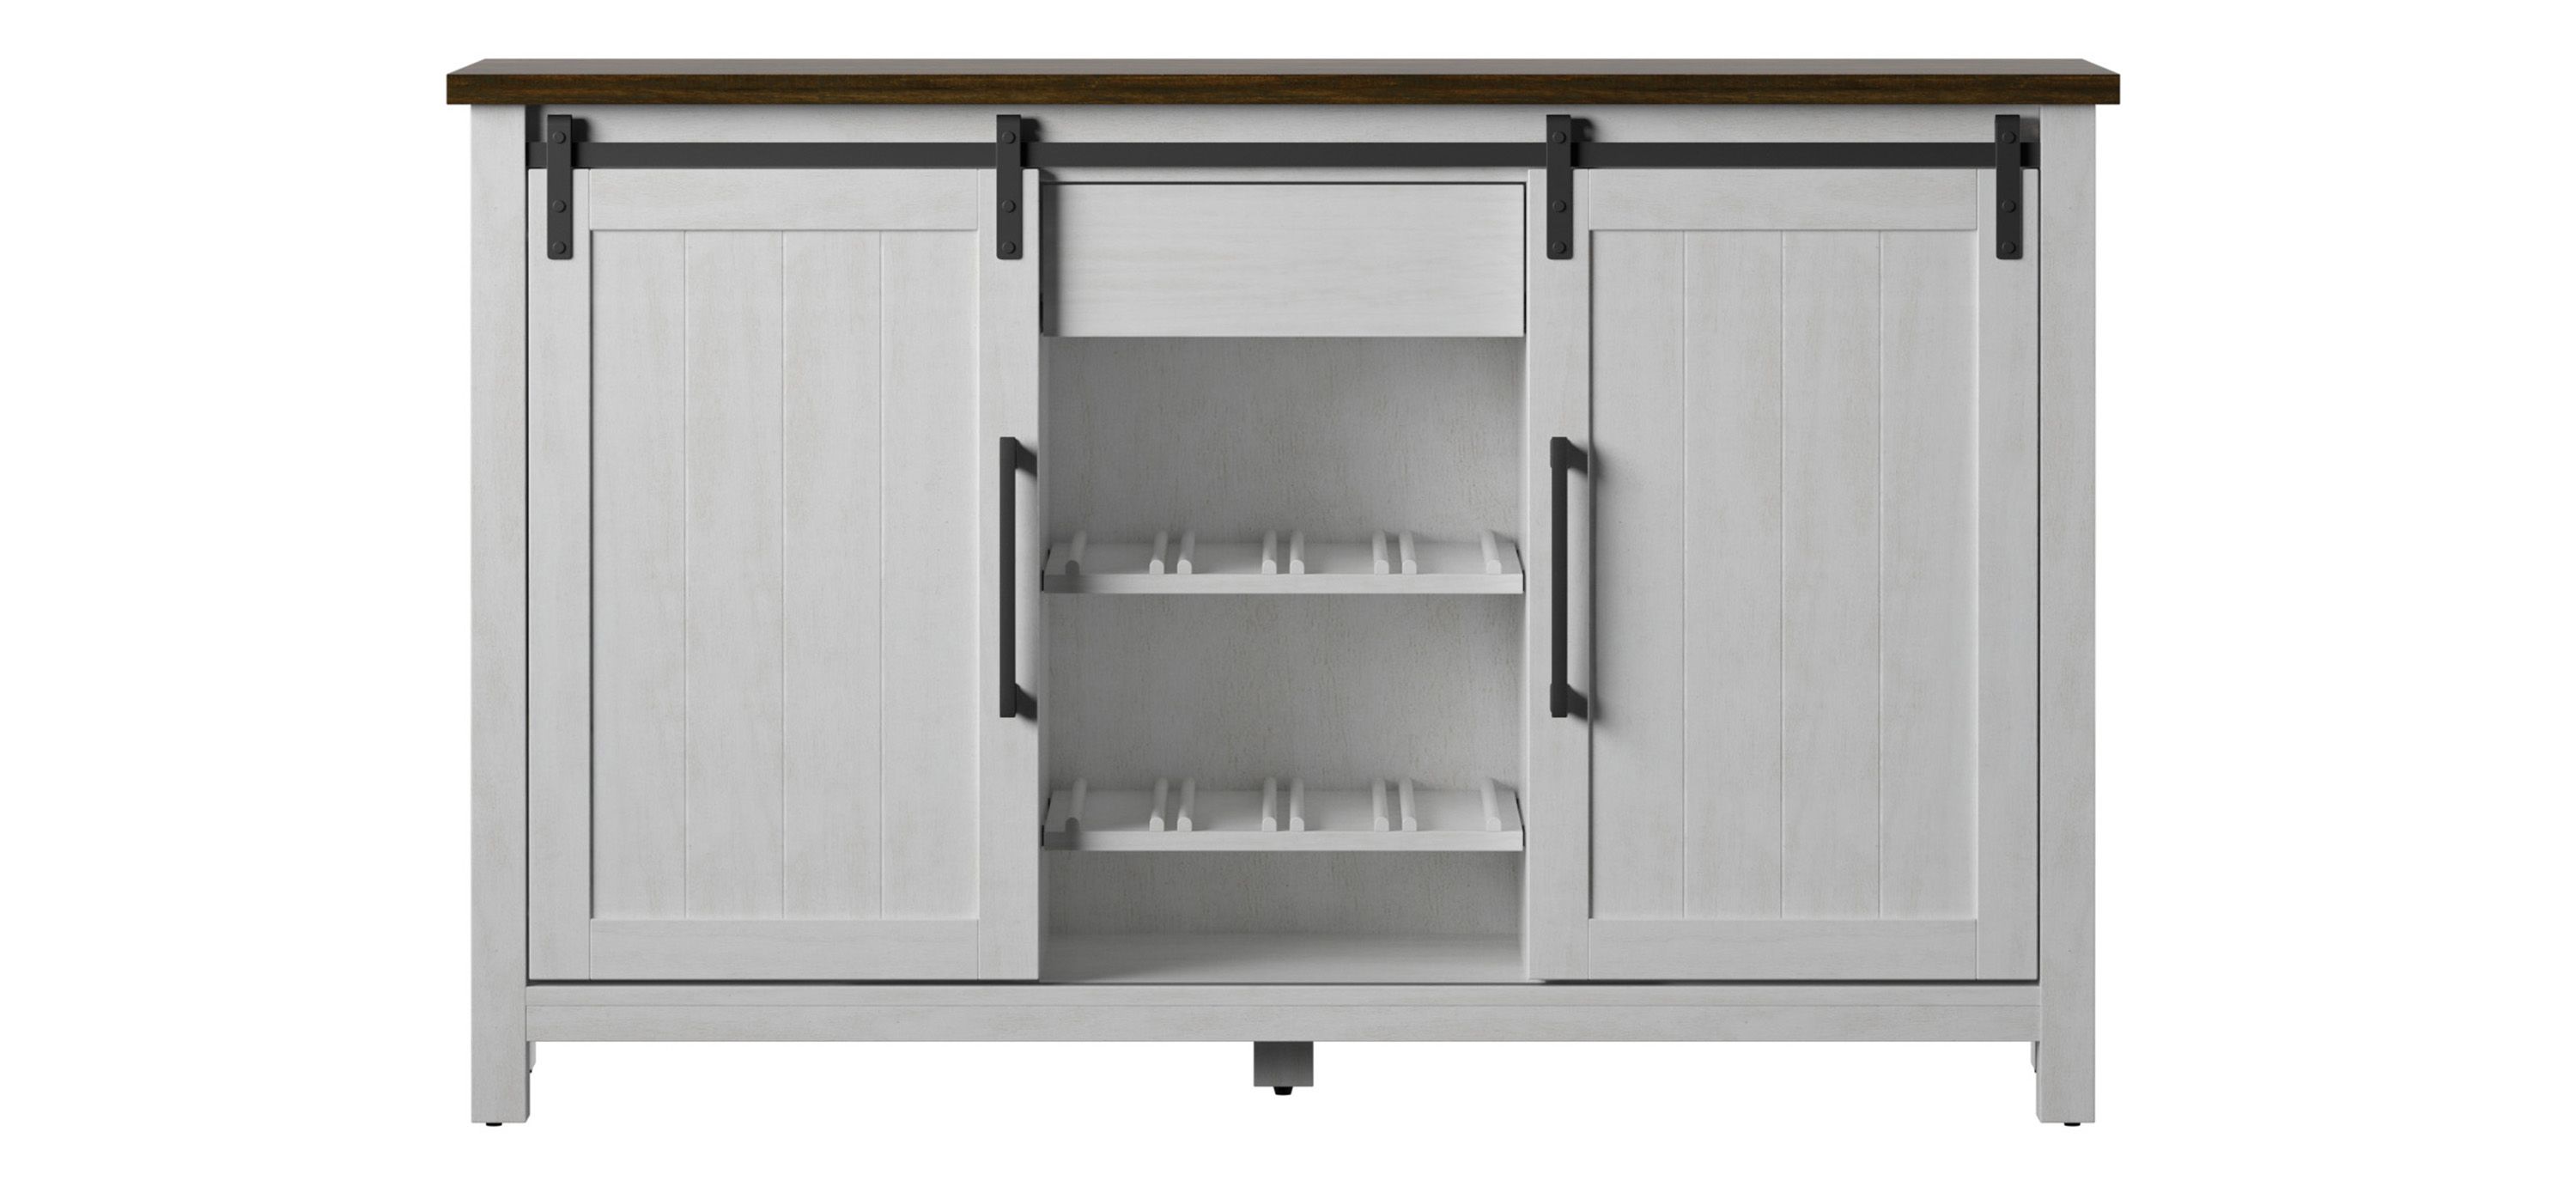 Parla Sideboard with Wine Storage